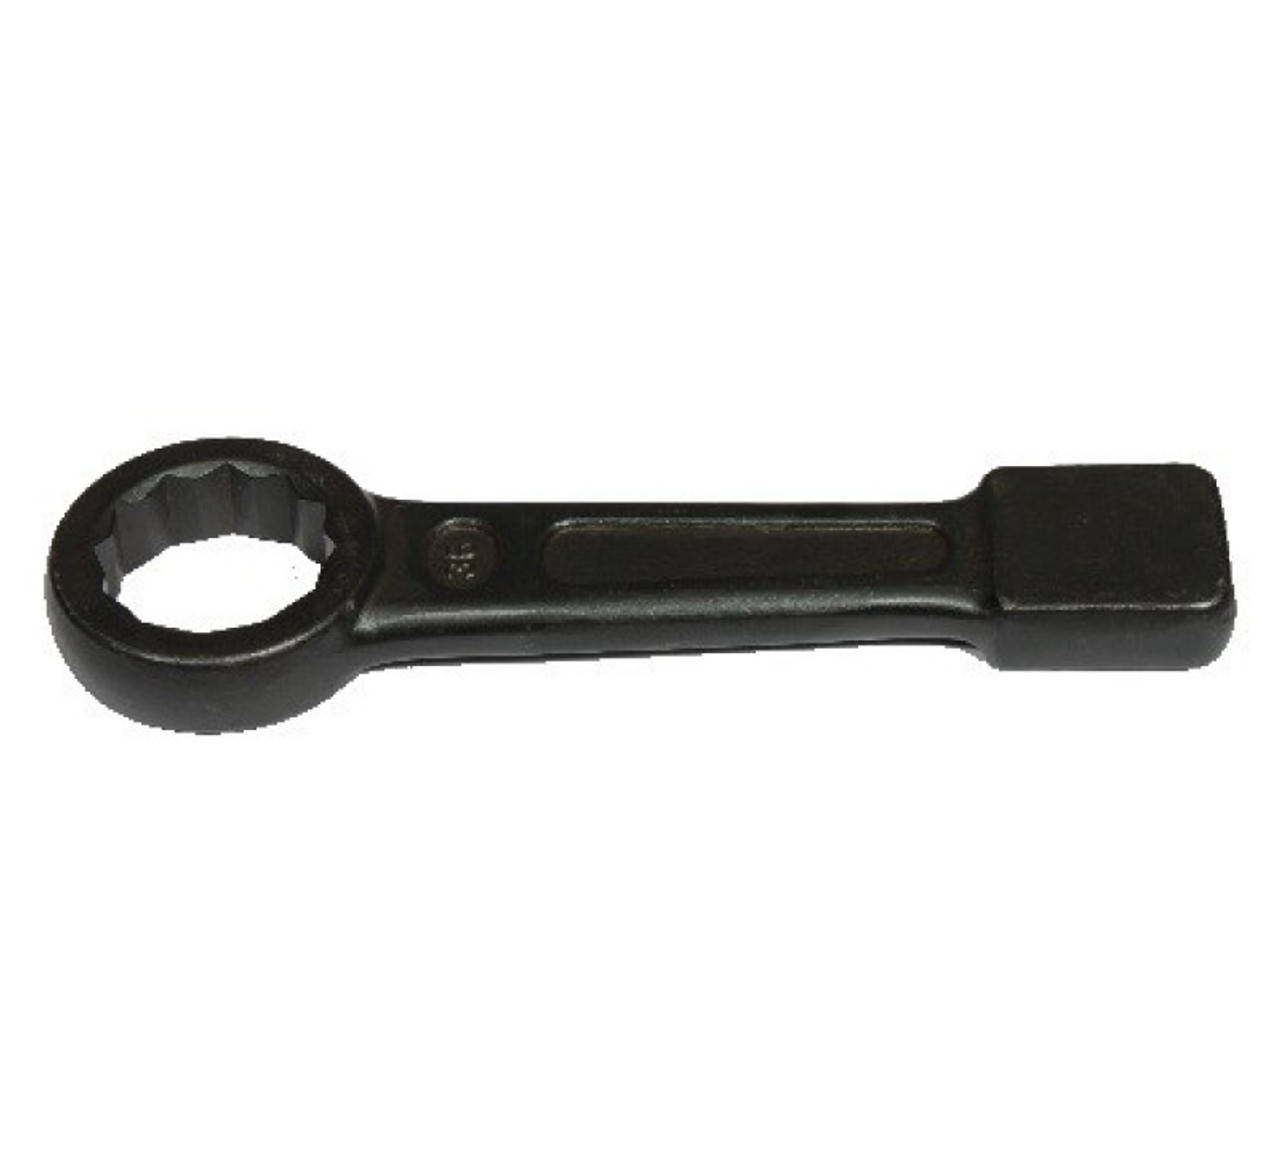 IMPA 611160 Striking wrench single open end 85 mm Kukko 133-85 (deliverytime 2 days - ex works factory)